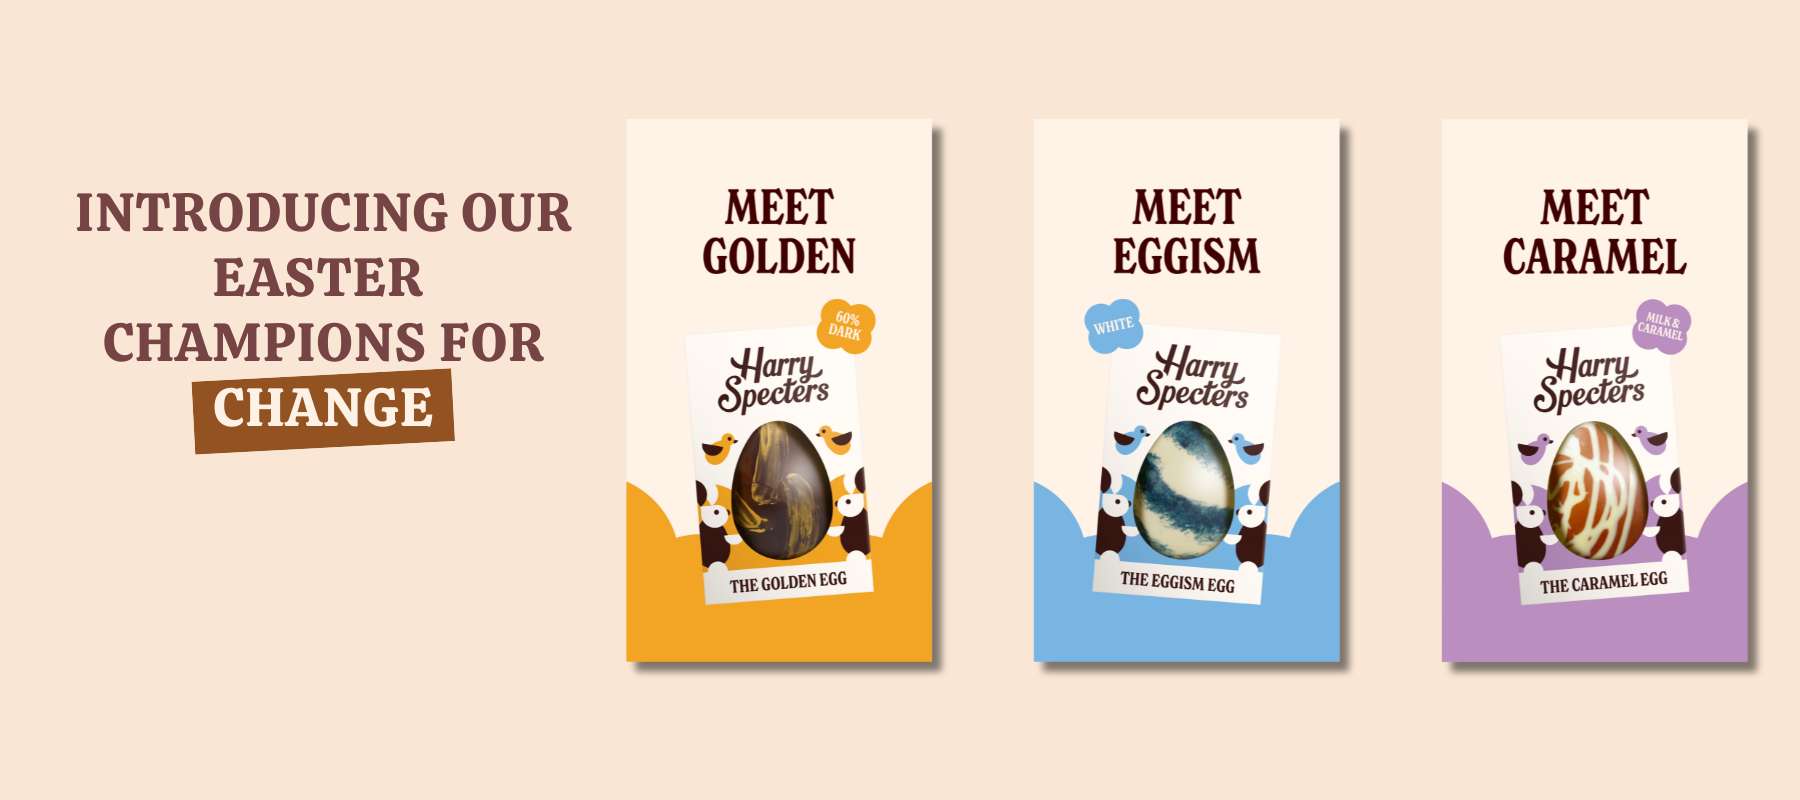 Harry Specters range of chocolate Easter eggs in colourful packaging